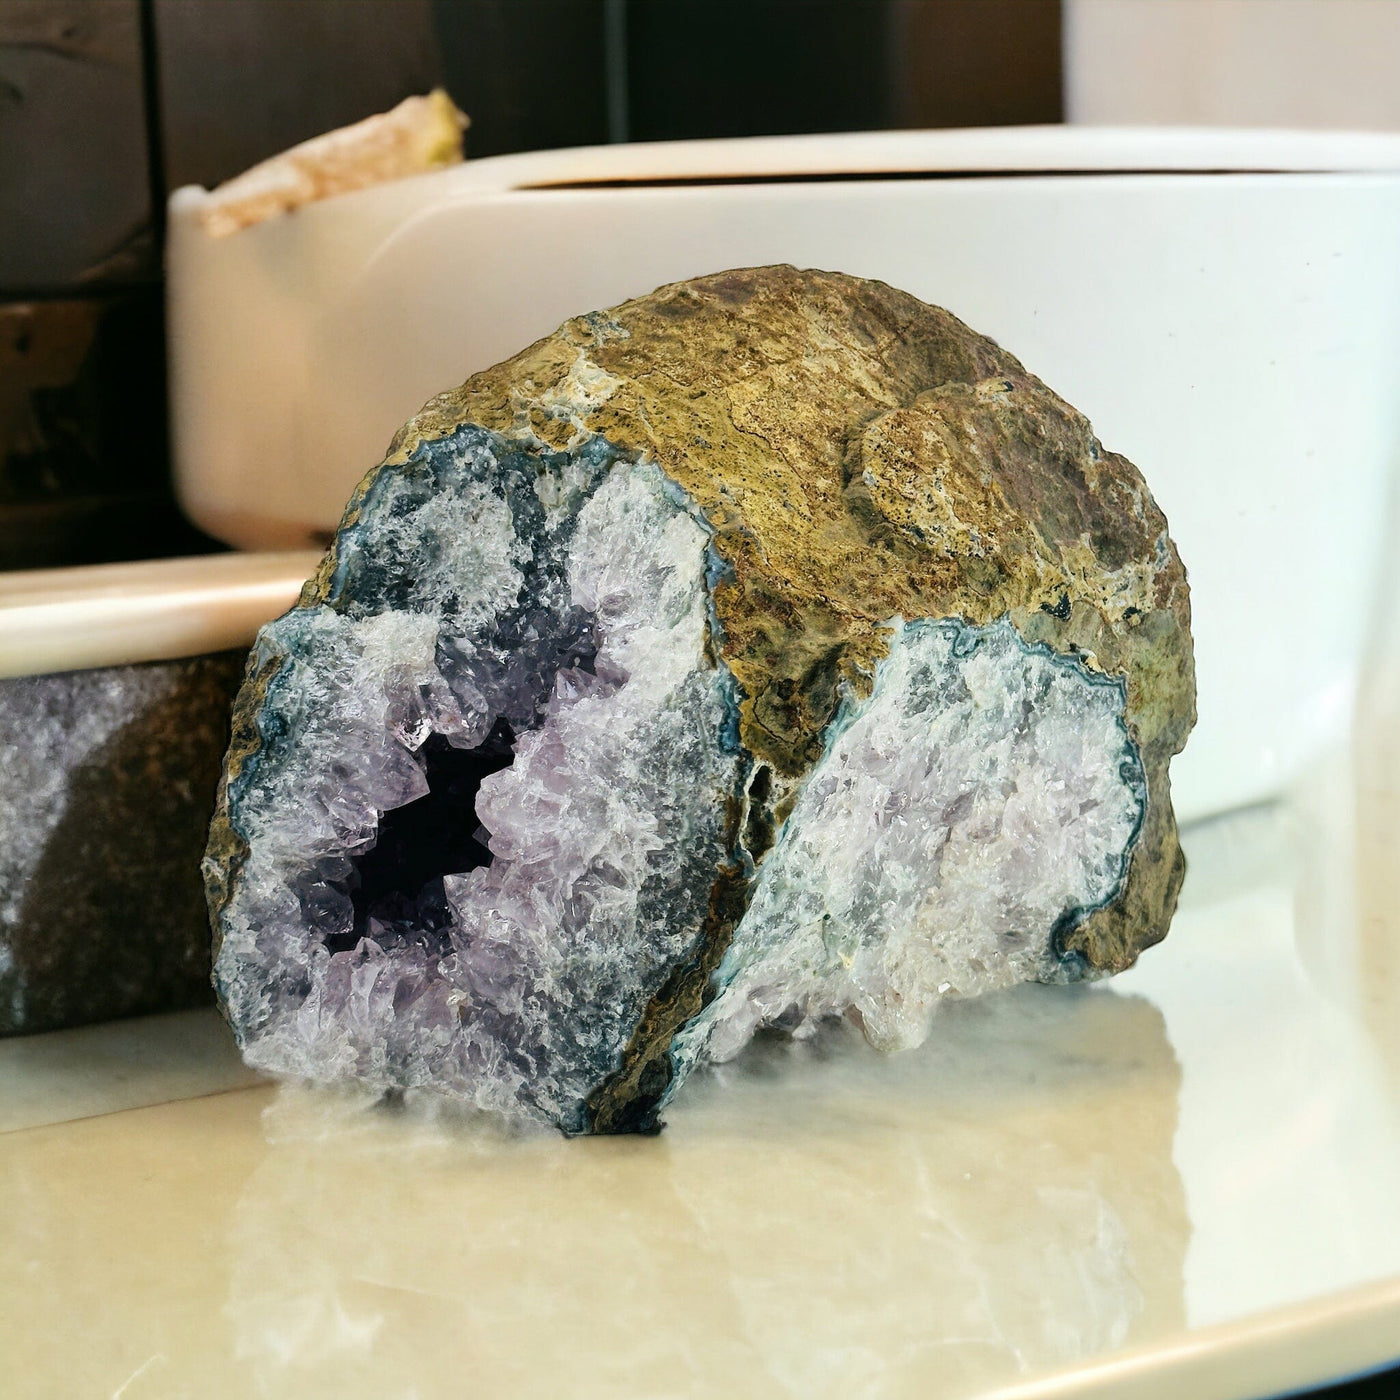  Amethyst Crystal on Matrix - You Choose - Variant A pictured on bathroom countertop